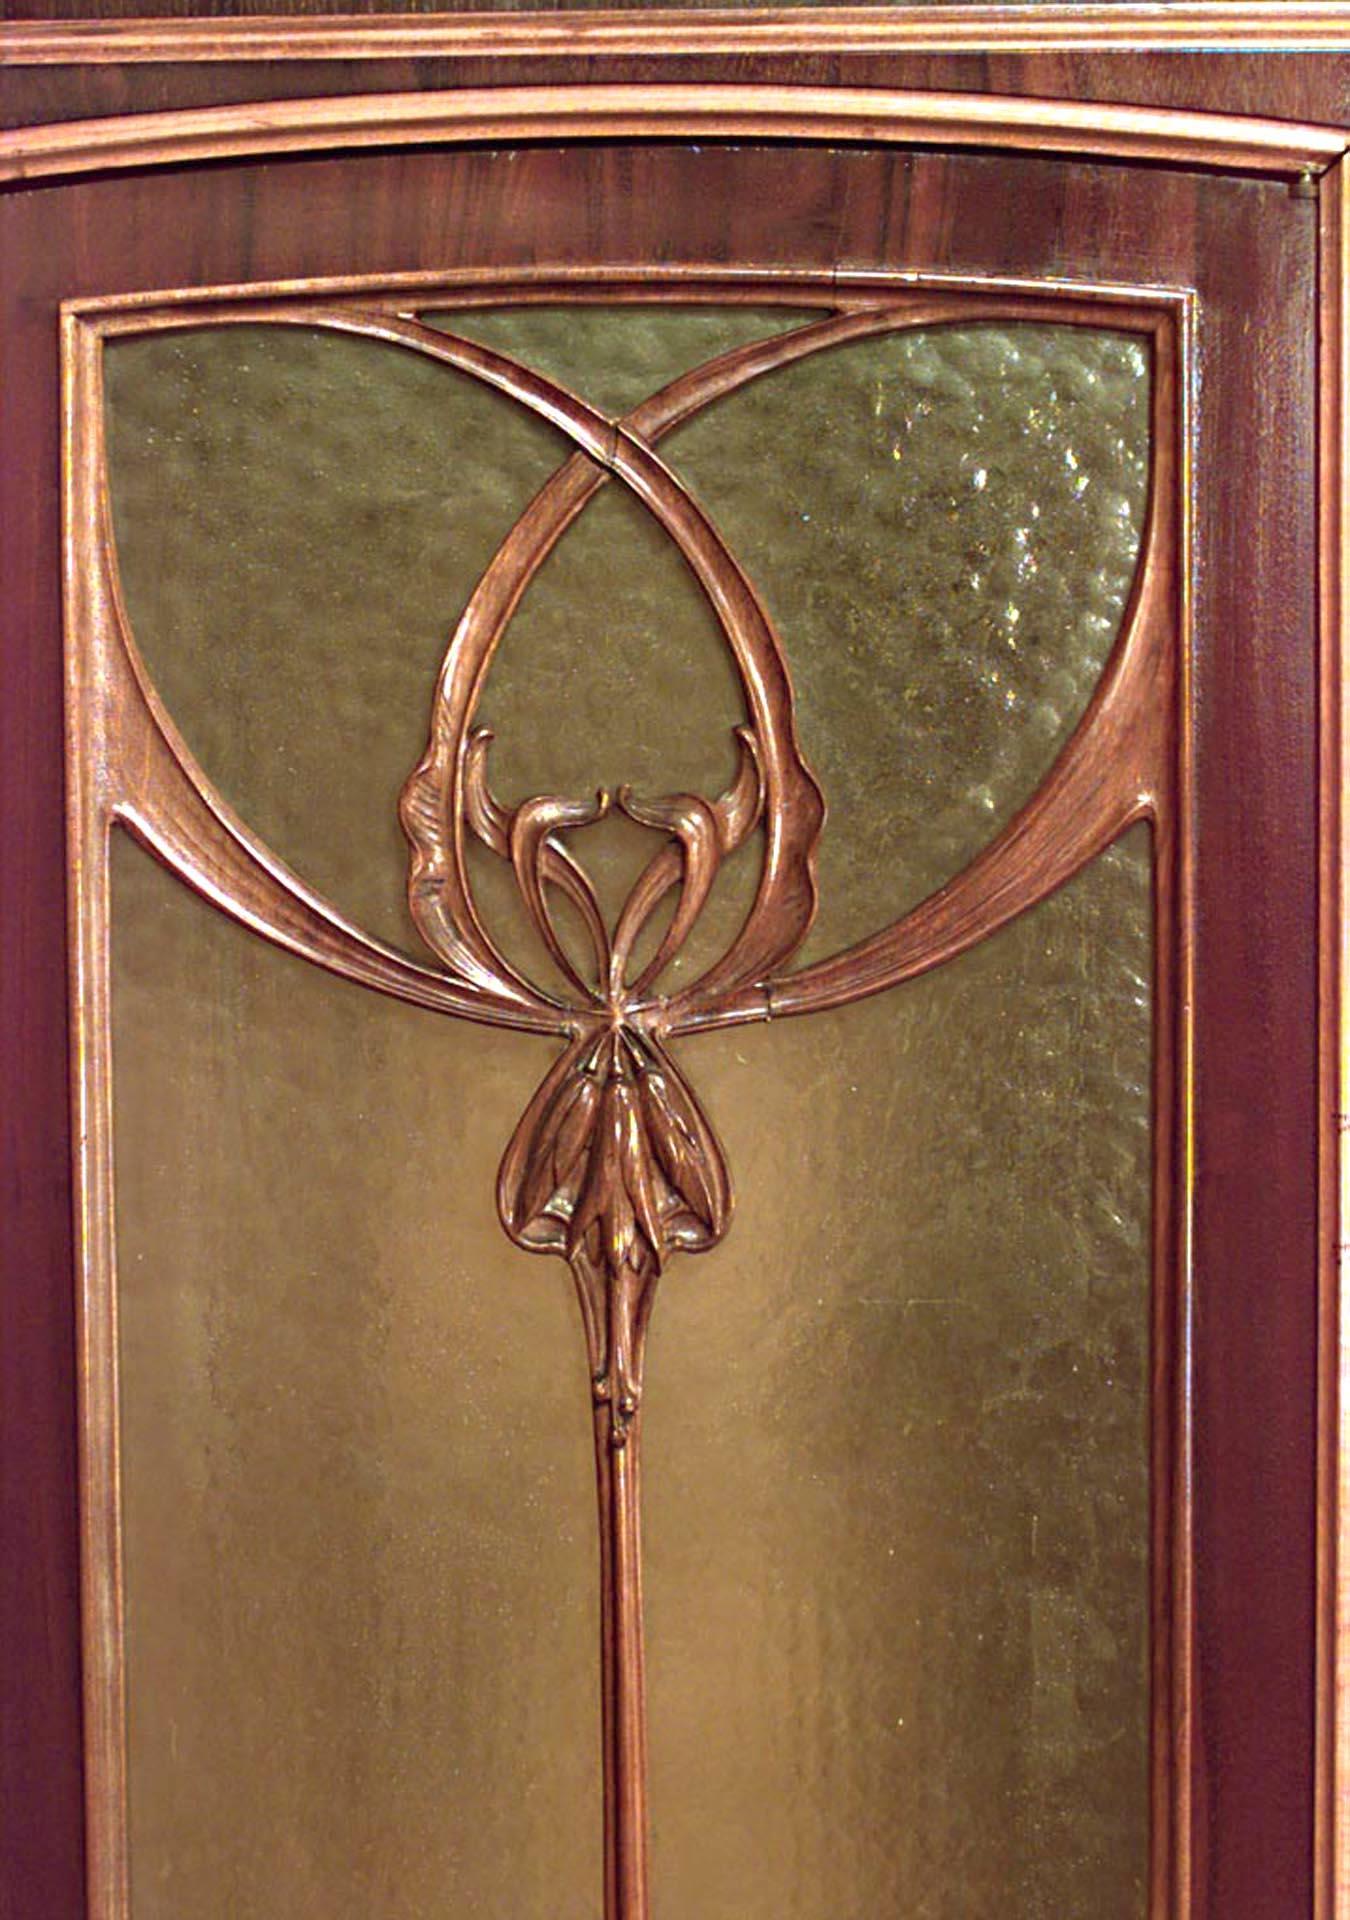 French Art Nouveau walnut and inlaid floral design 3 door armoire cabinet with shelf on bottom and top with spindle sides. (signed: LOUIS MAJORELLE).
      